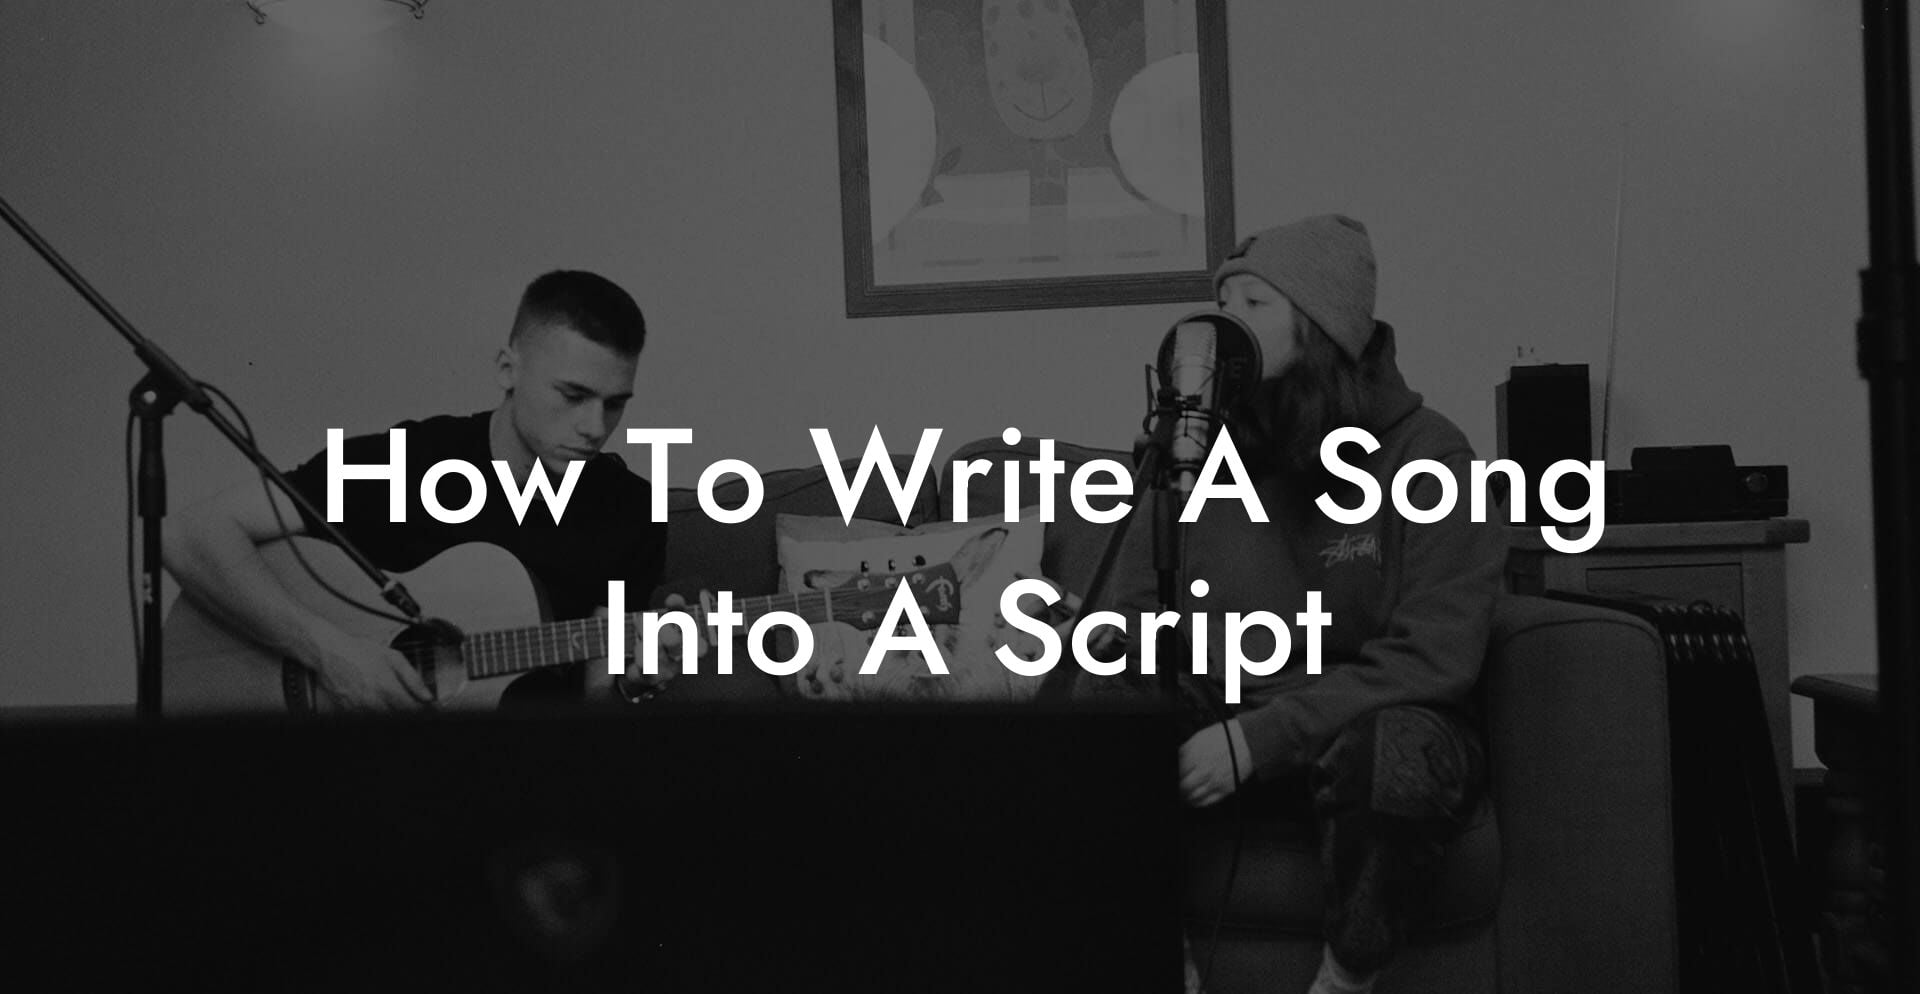 how to write a song into a script lyric assistant